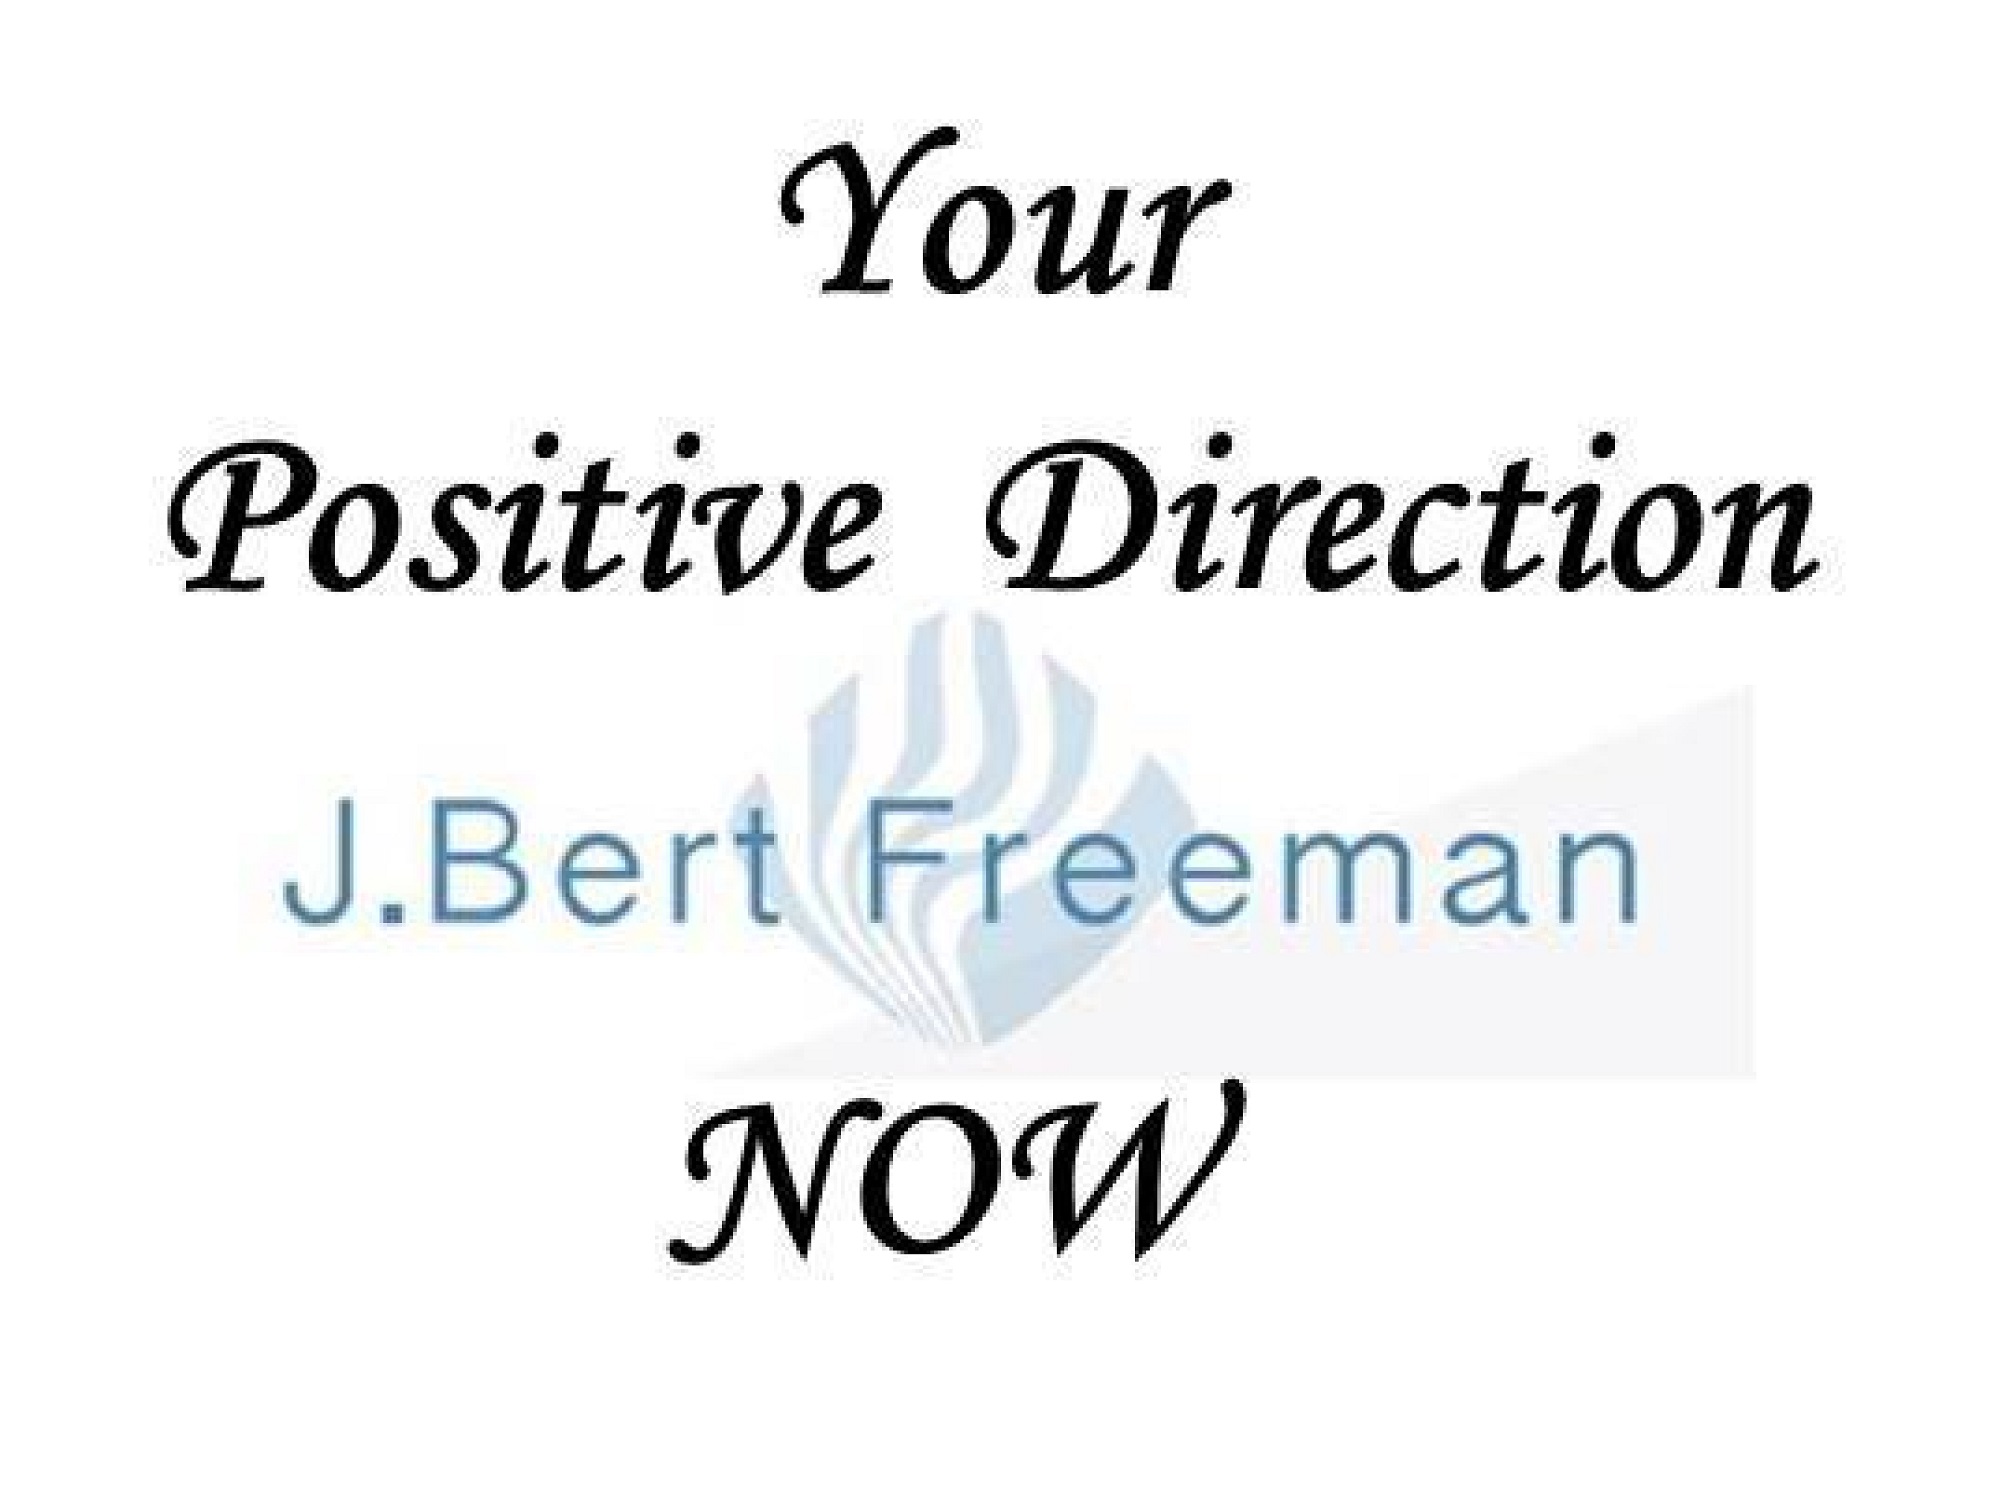 Your Positive Direction NOW with J. Bert Freeman